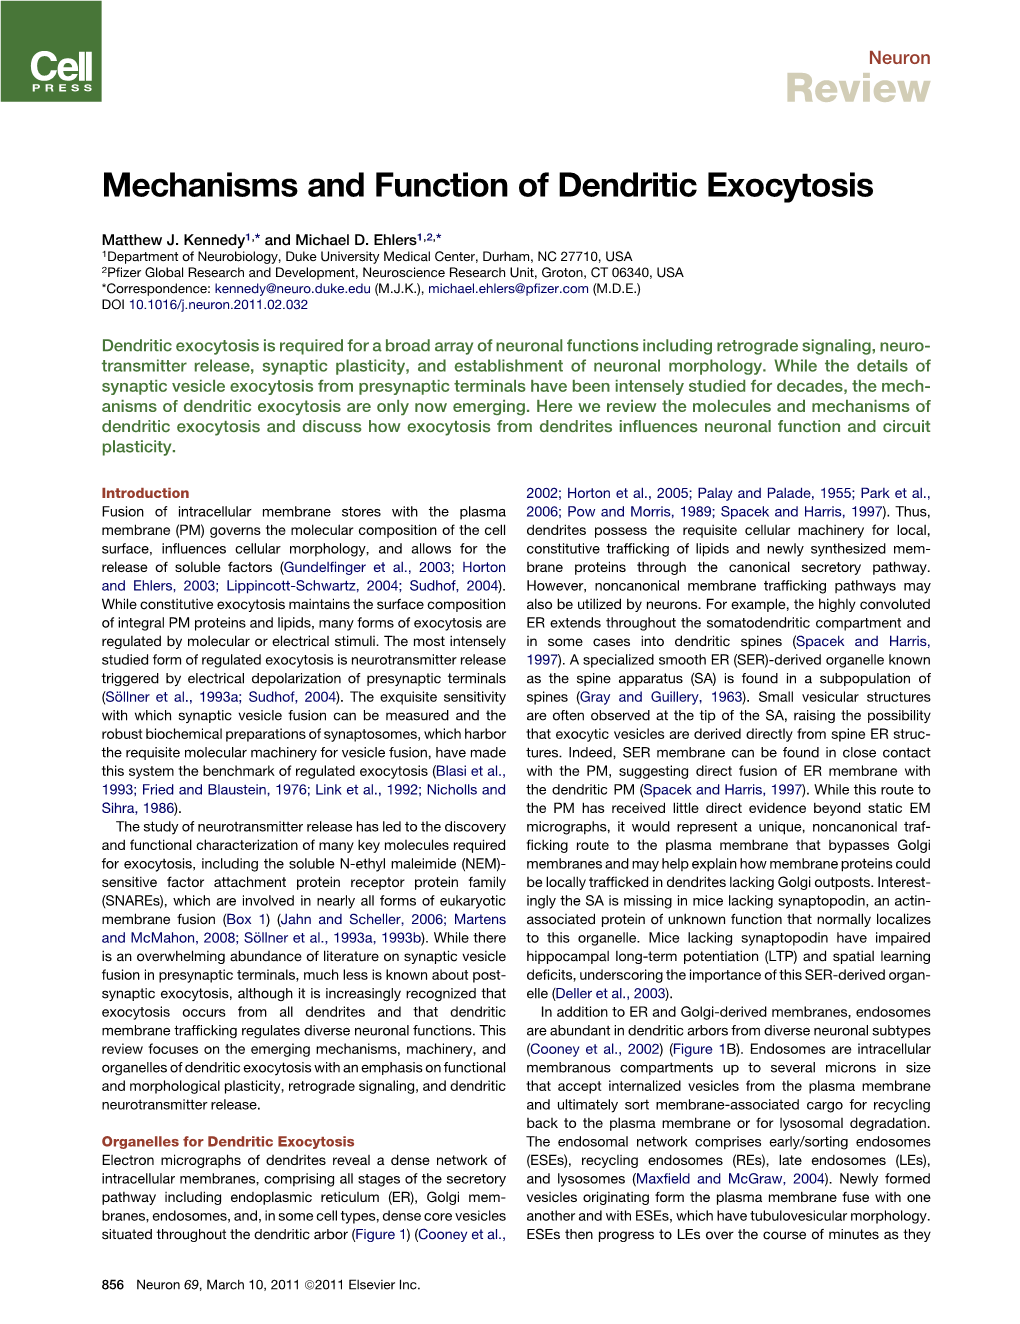 Mechanisms and Function of Dendritic Exocytosis